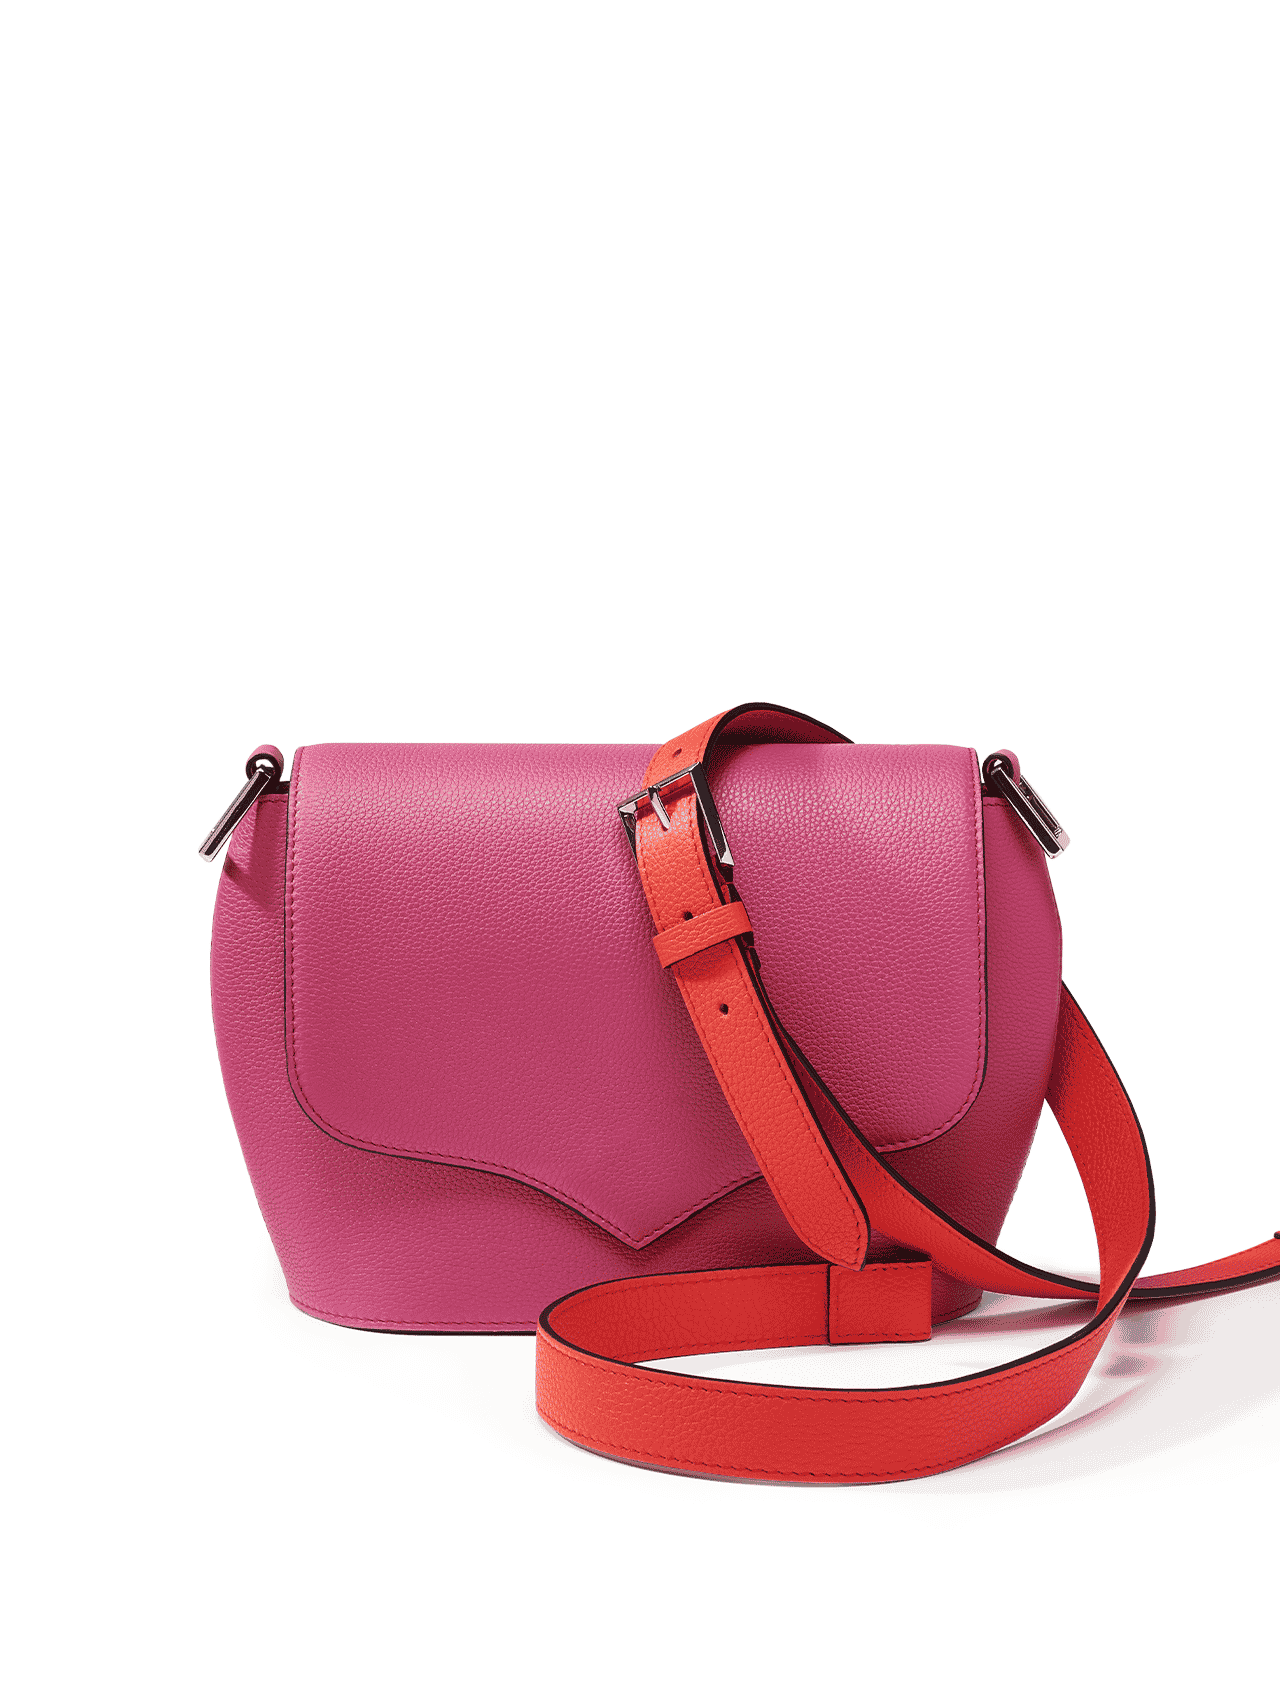 bag leather jean rousseau pink purple red